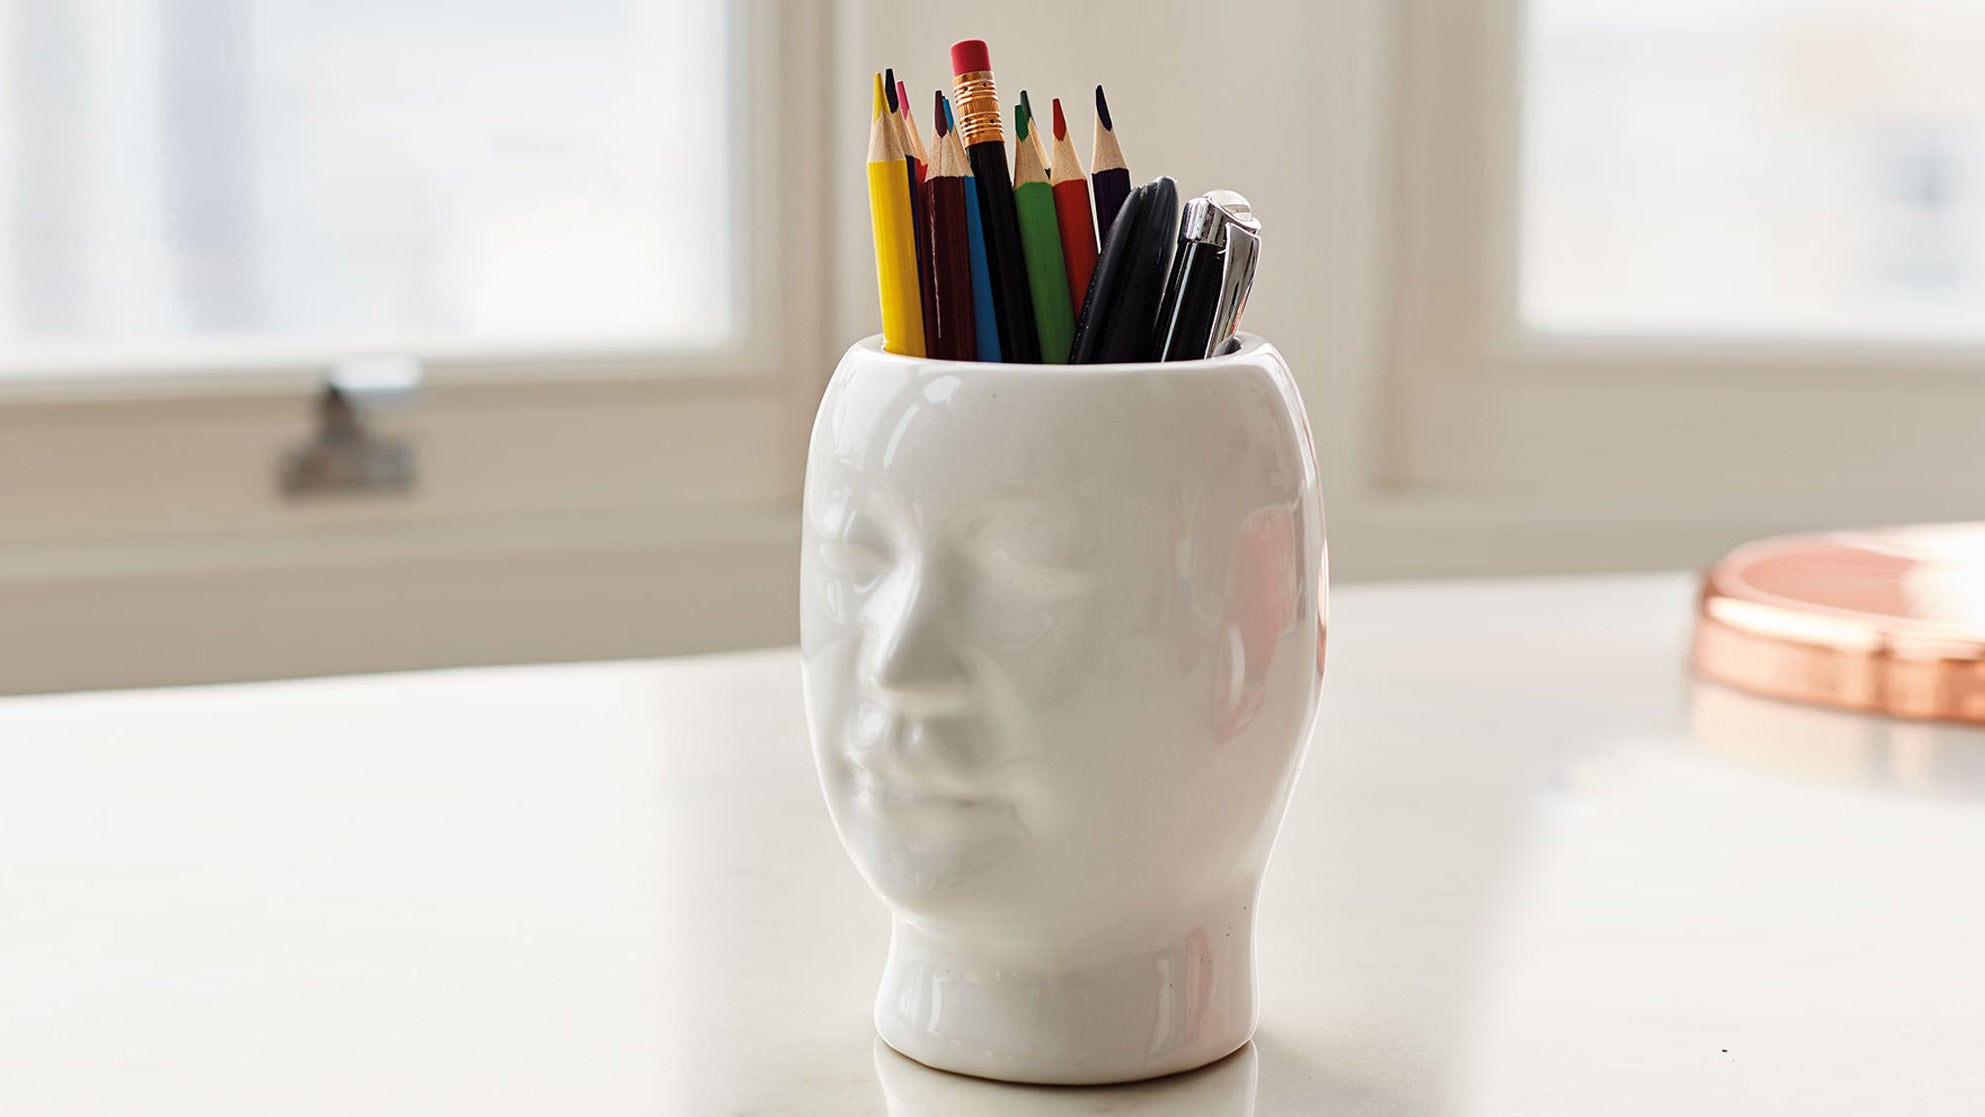 White cup in the shape of a head with pencils in it.